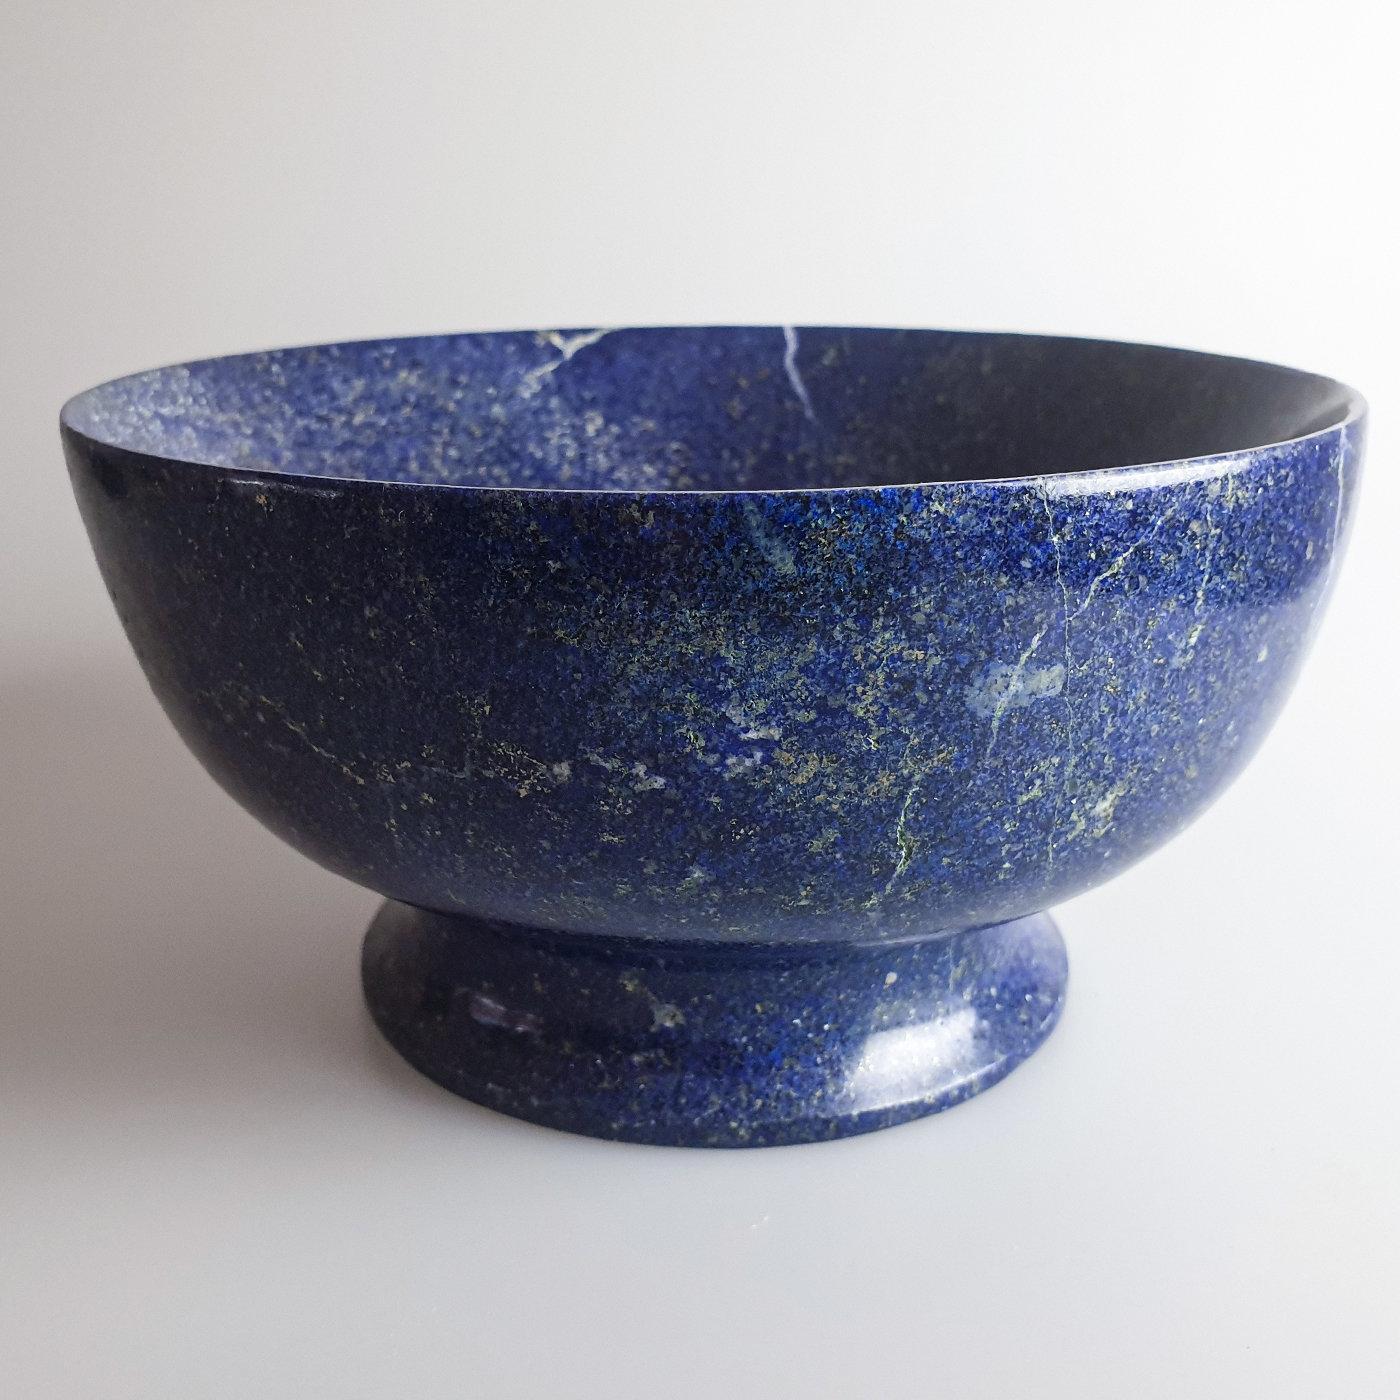 Often referred to as the stone of the gods, this breathtaking lapis lazuli hails from Afghanistan, where the finest quality has been mined for centuries. Crafted out of a single block, this magnificent bowl is a one-of-a-kind piece showcasing its